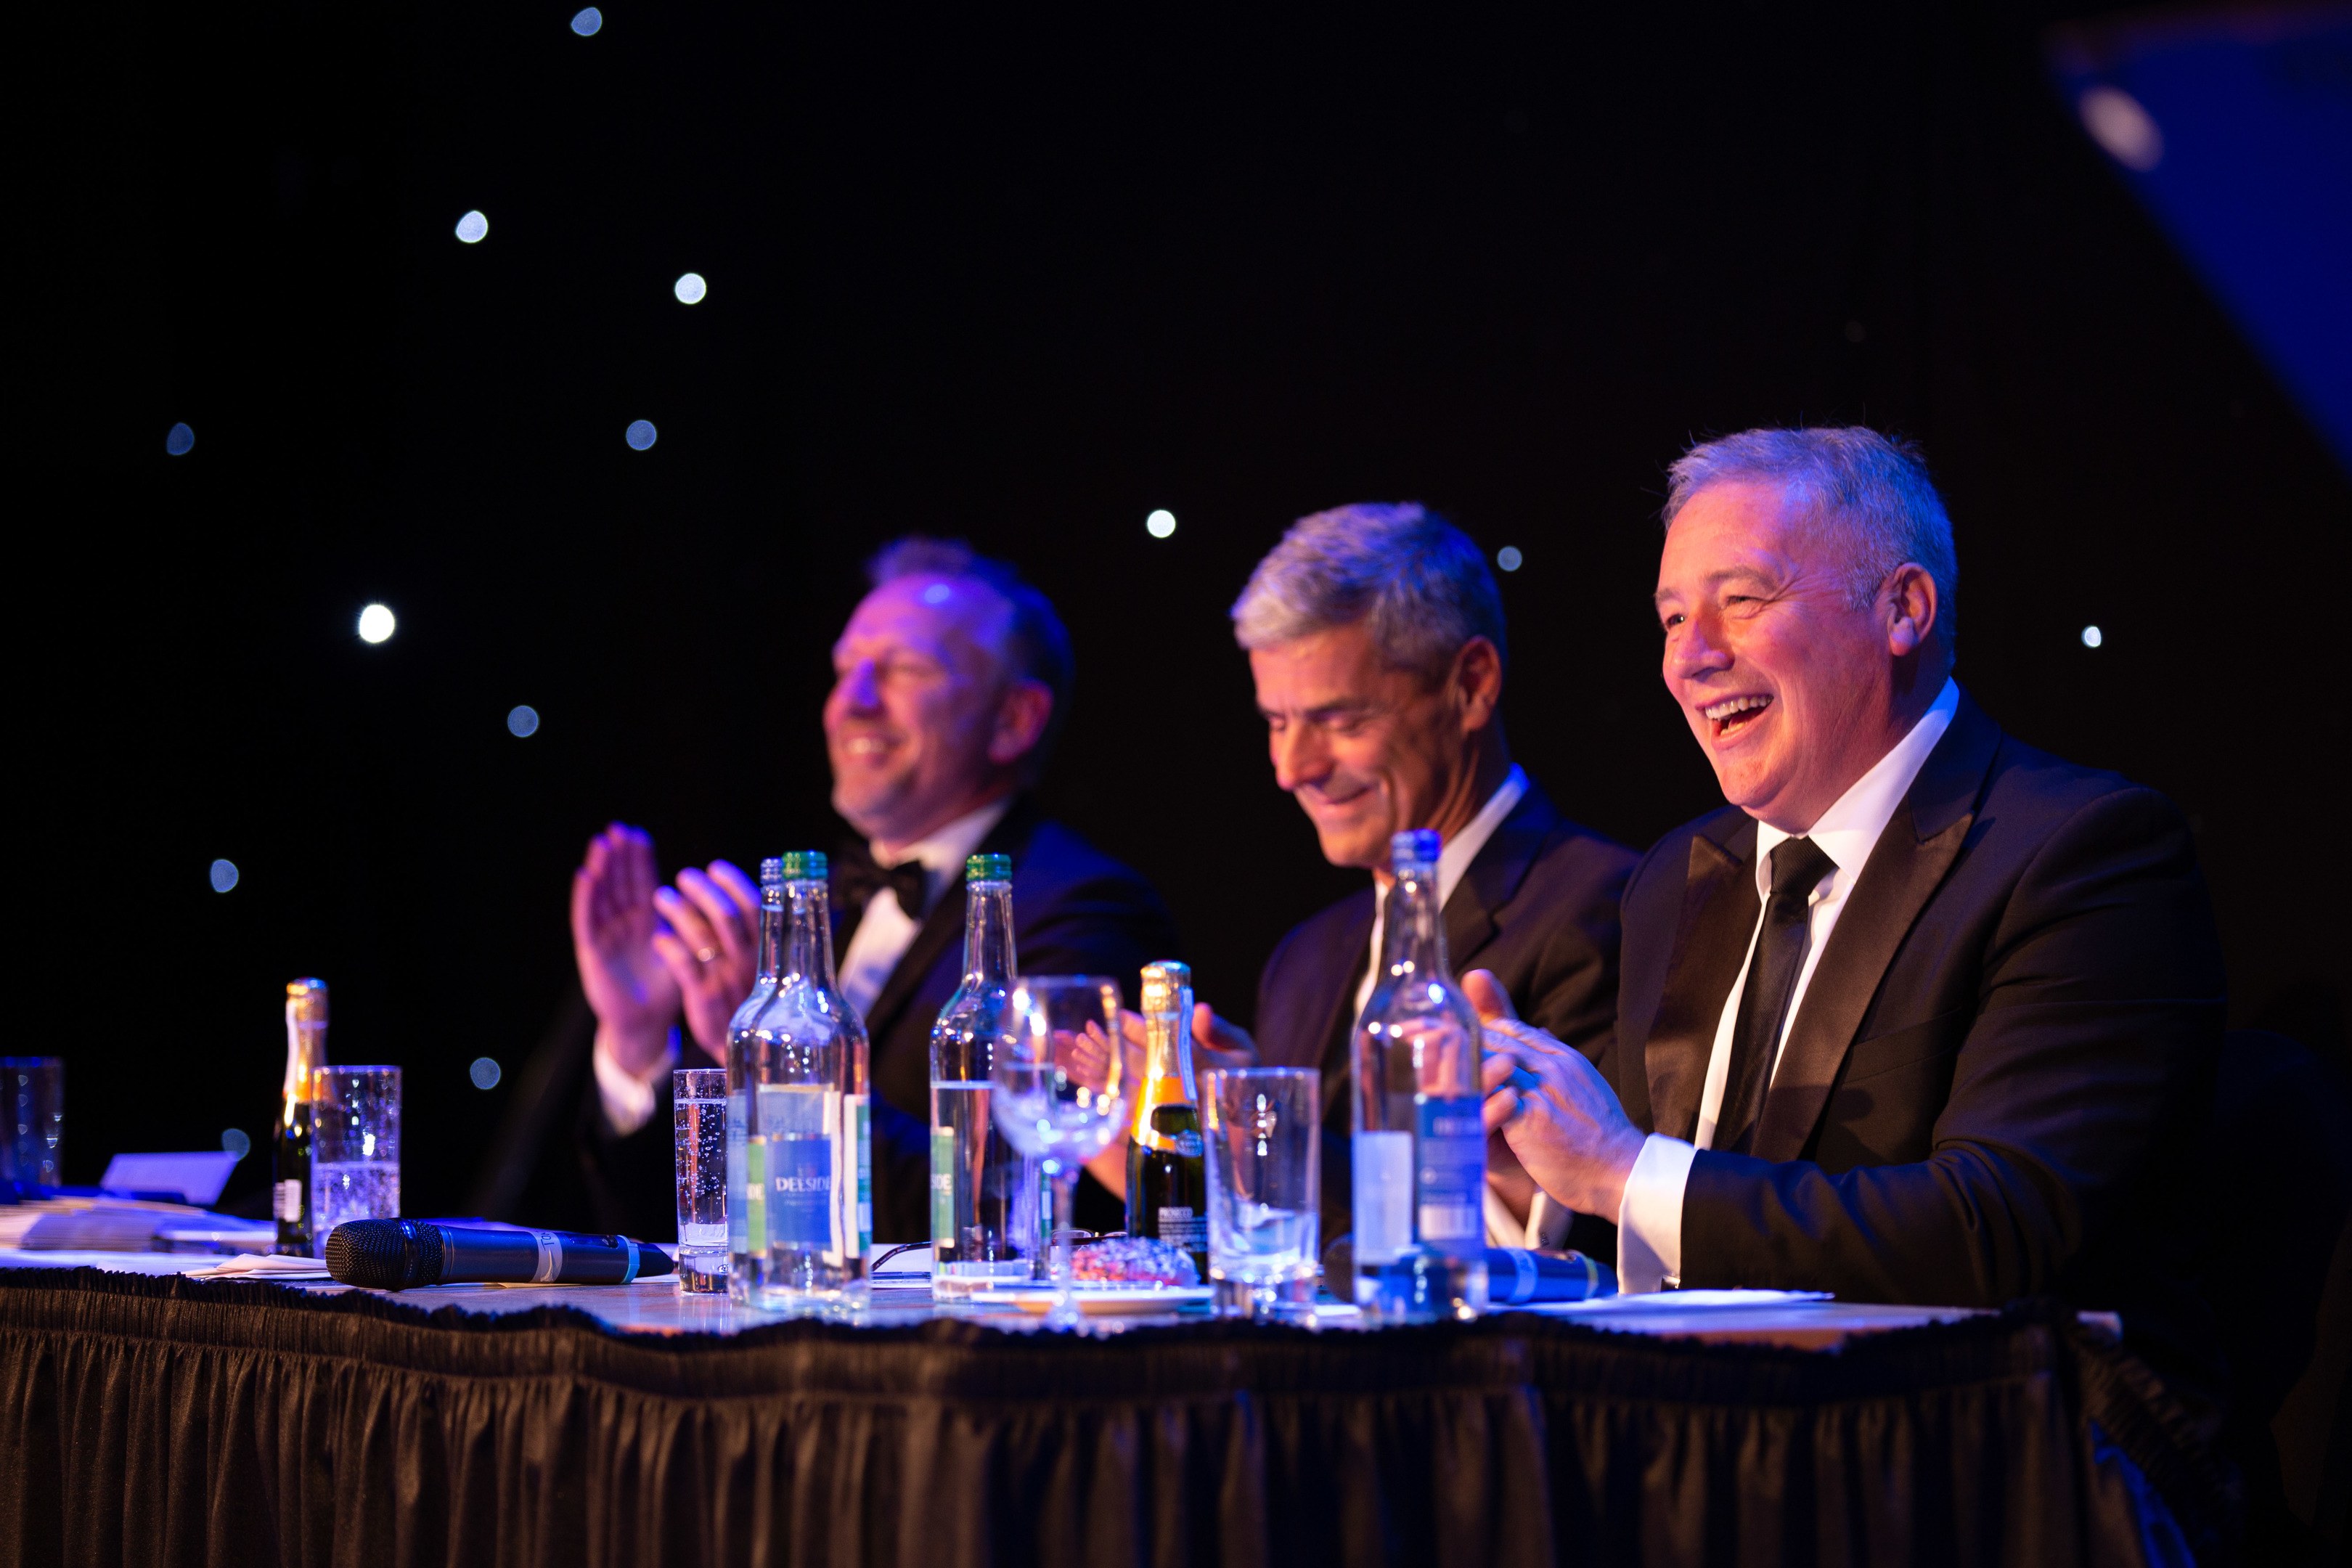 Ally McCoist co-hosted the 2018 Simmons & Company Ltd Sportschallenge at the AECC.